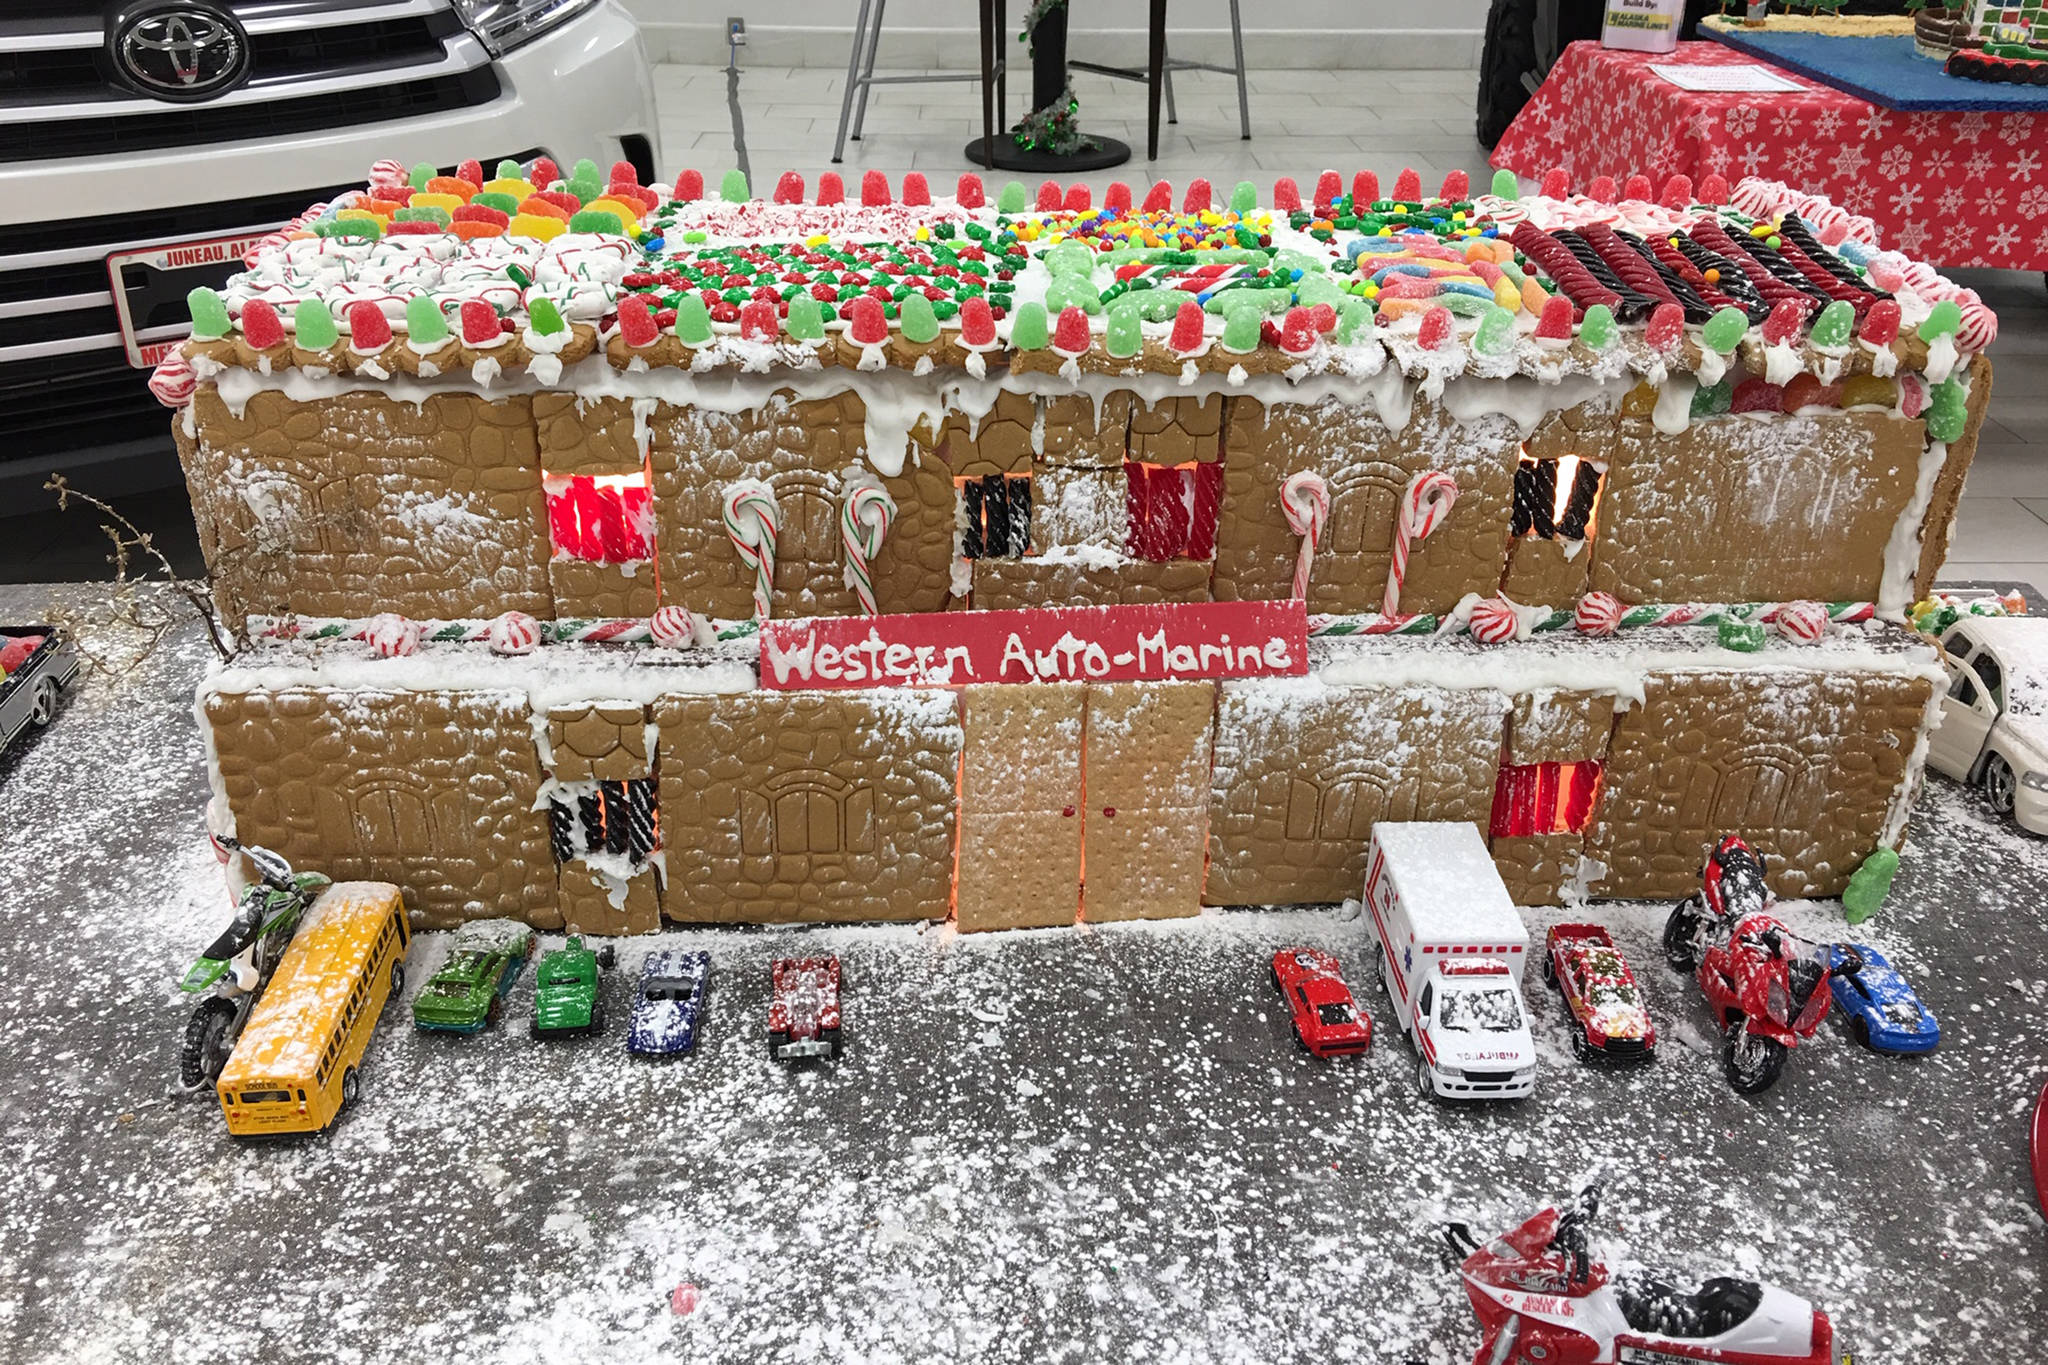 After voting settled the evening of Wednesday, Dec. 19, 2018, this gingerbread house made by Western Auto-Marine raised more than $5,000 for Hospice & Home Care of Juneau. (Courtesy Photo | Mendenhall Auto Center)